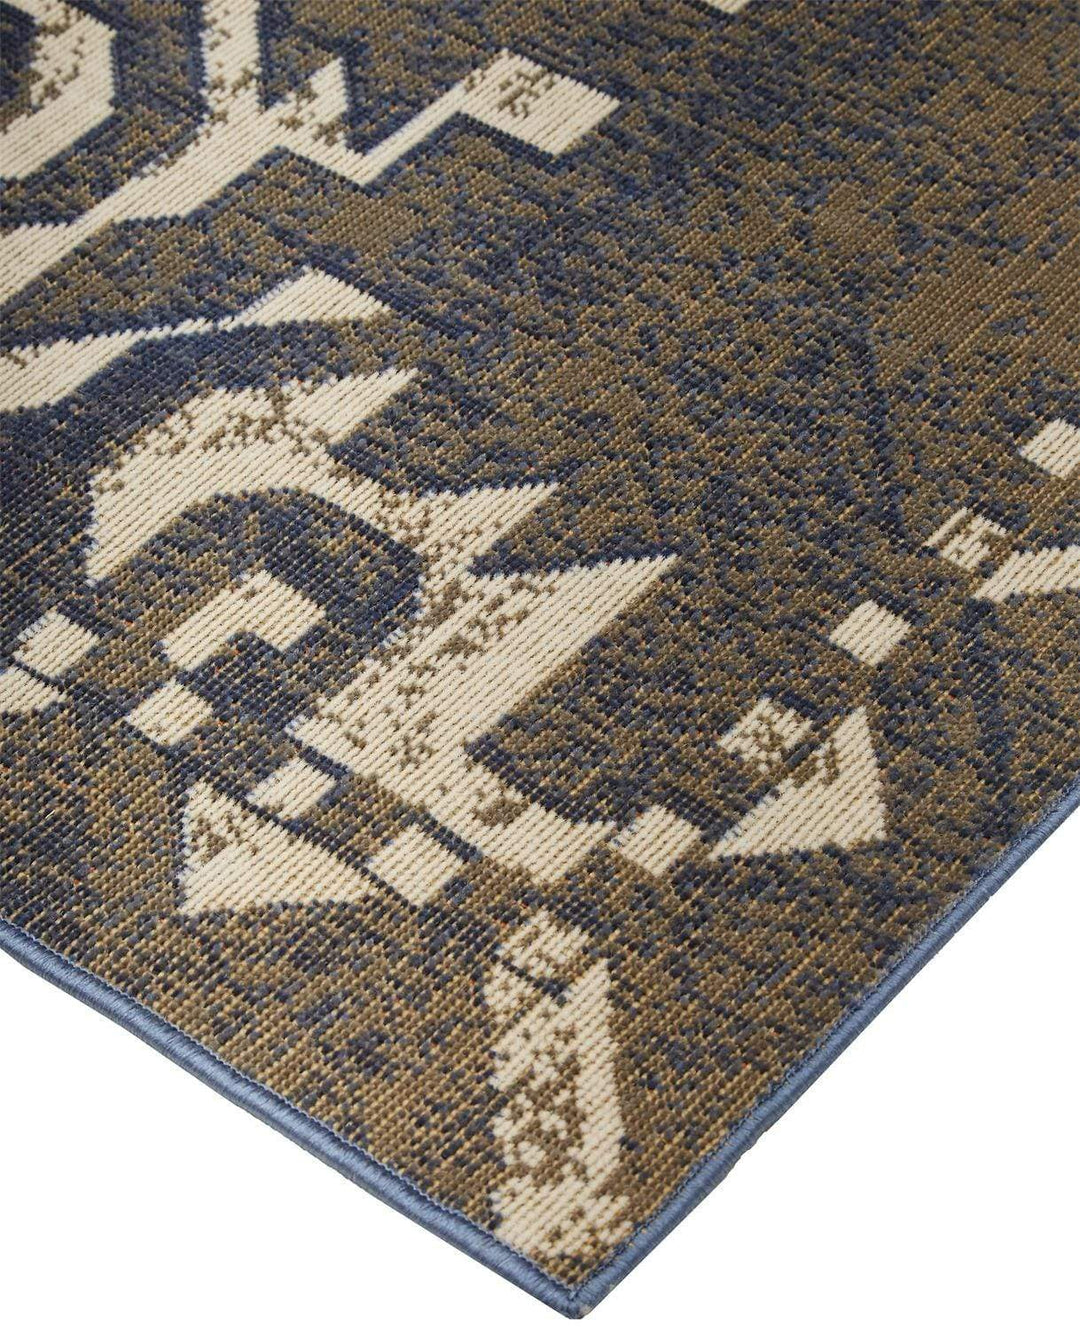 Feizy Feizy Foster Modern Style Slavic Kilim Rug - Navy Blue & Dark Gray - Available in 7 Sizes